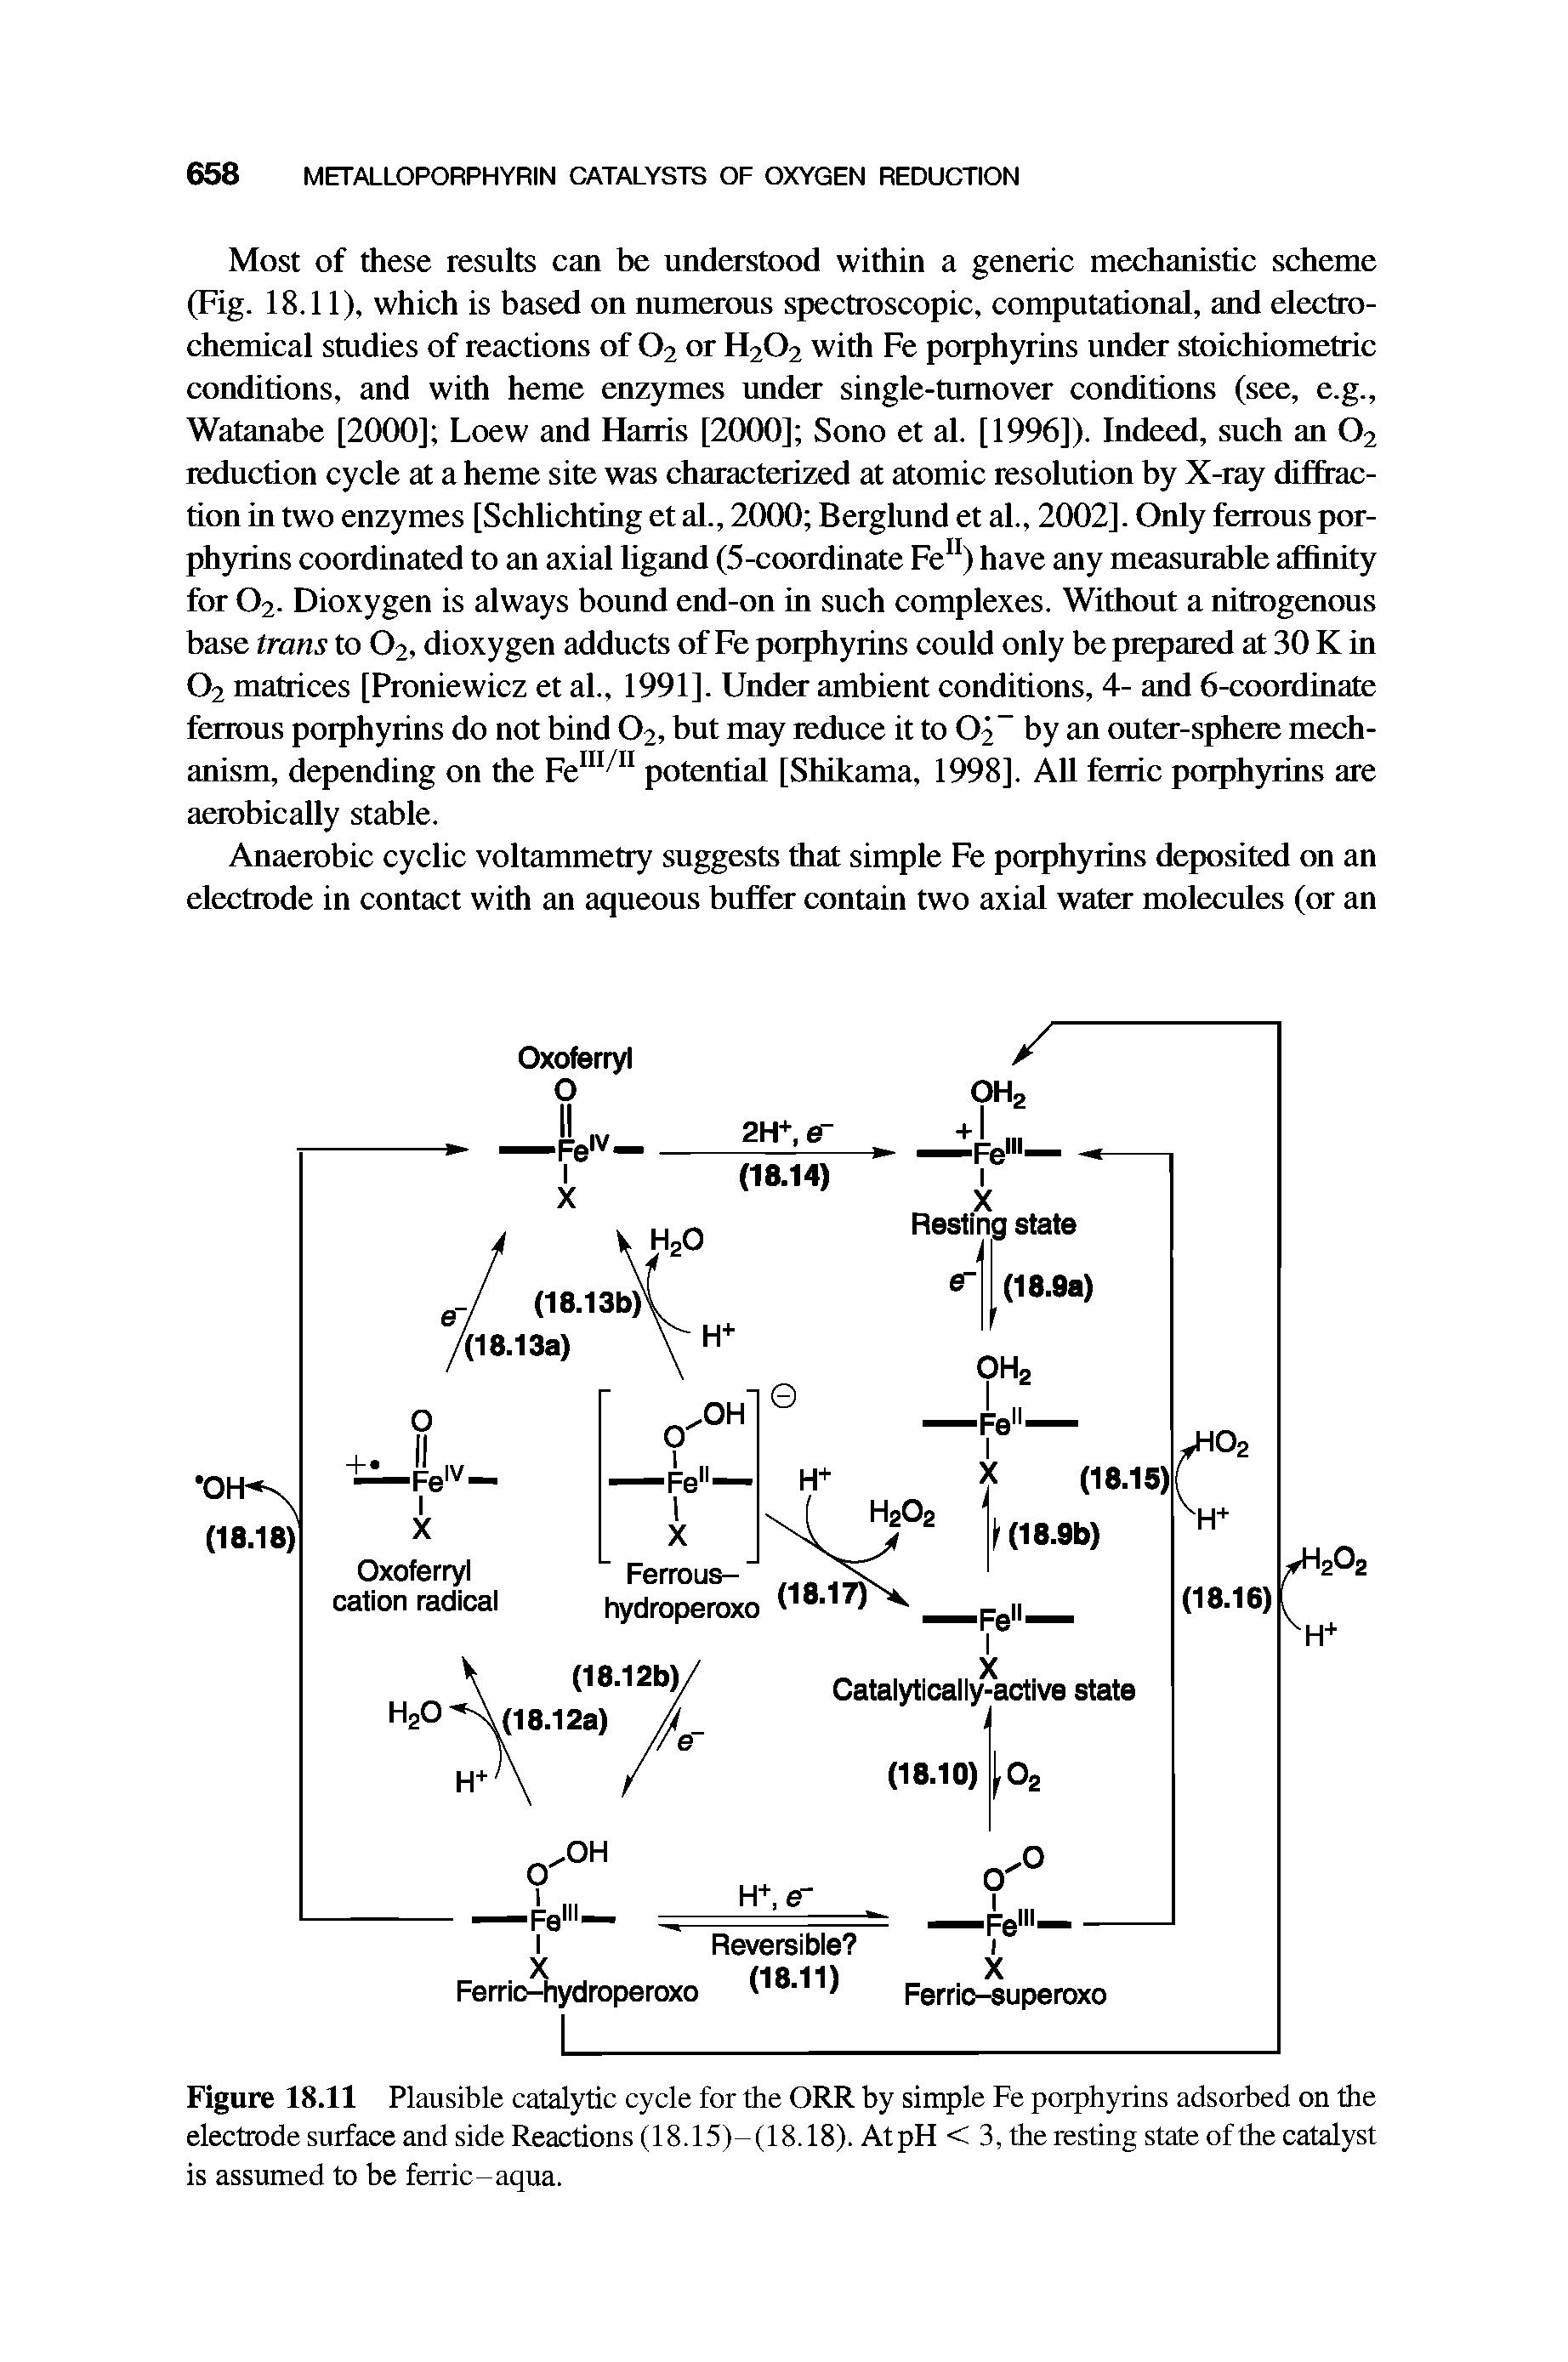 Figure 18.11 Plausible catalytic cycle for the ORR by simple Fe porphyrins adsorbed on the electrode surface and side Reactions (18.15)-(18.18). At pH < 3, the resting state of the catalyst is assumed to be ferric-aqua.